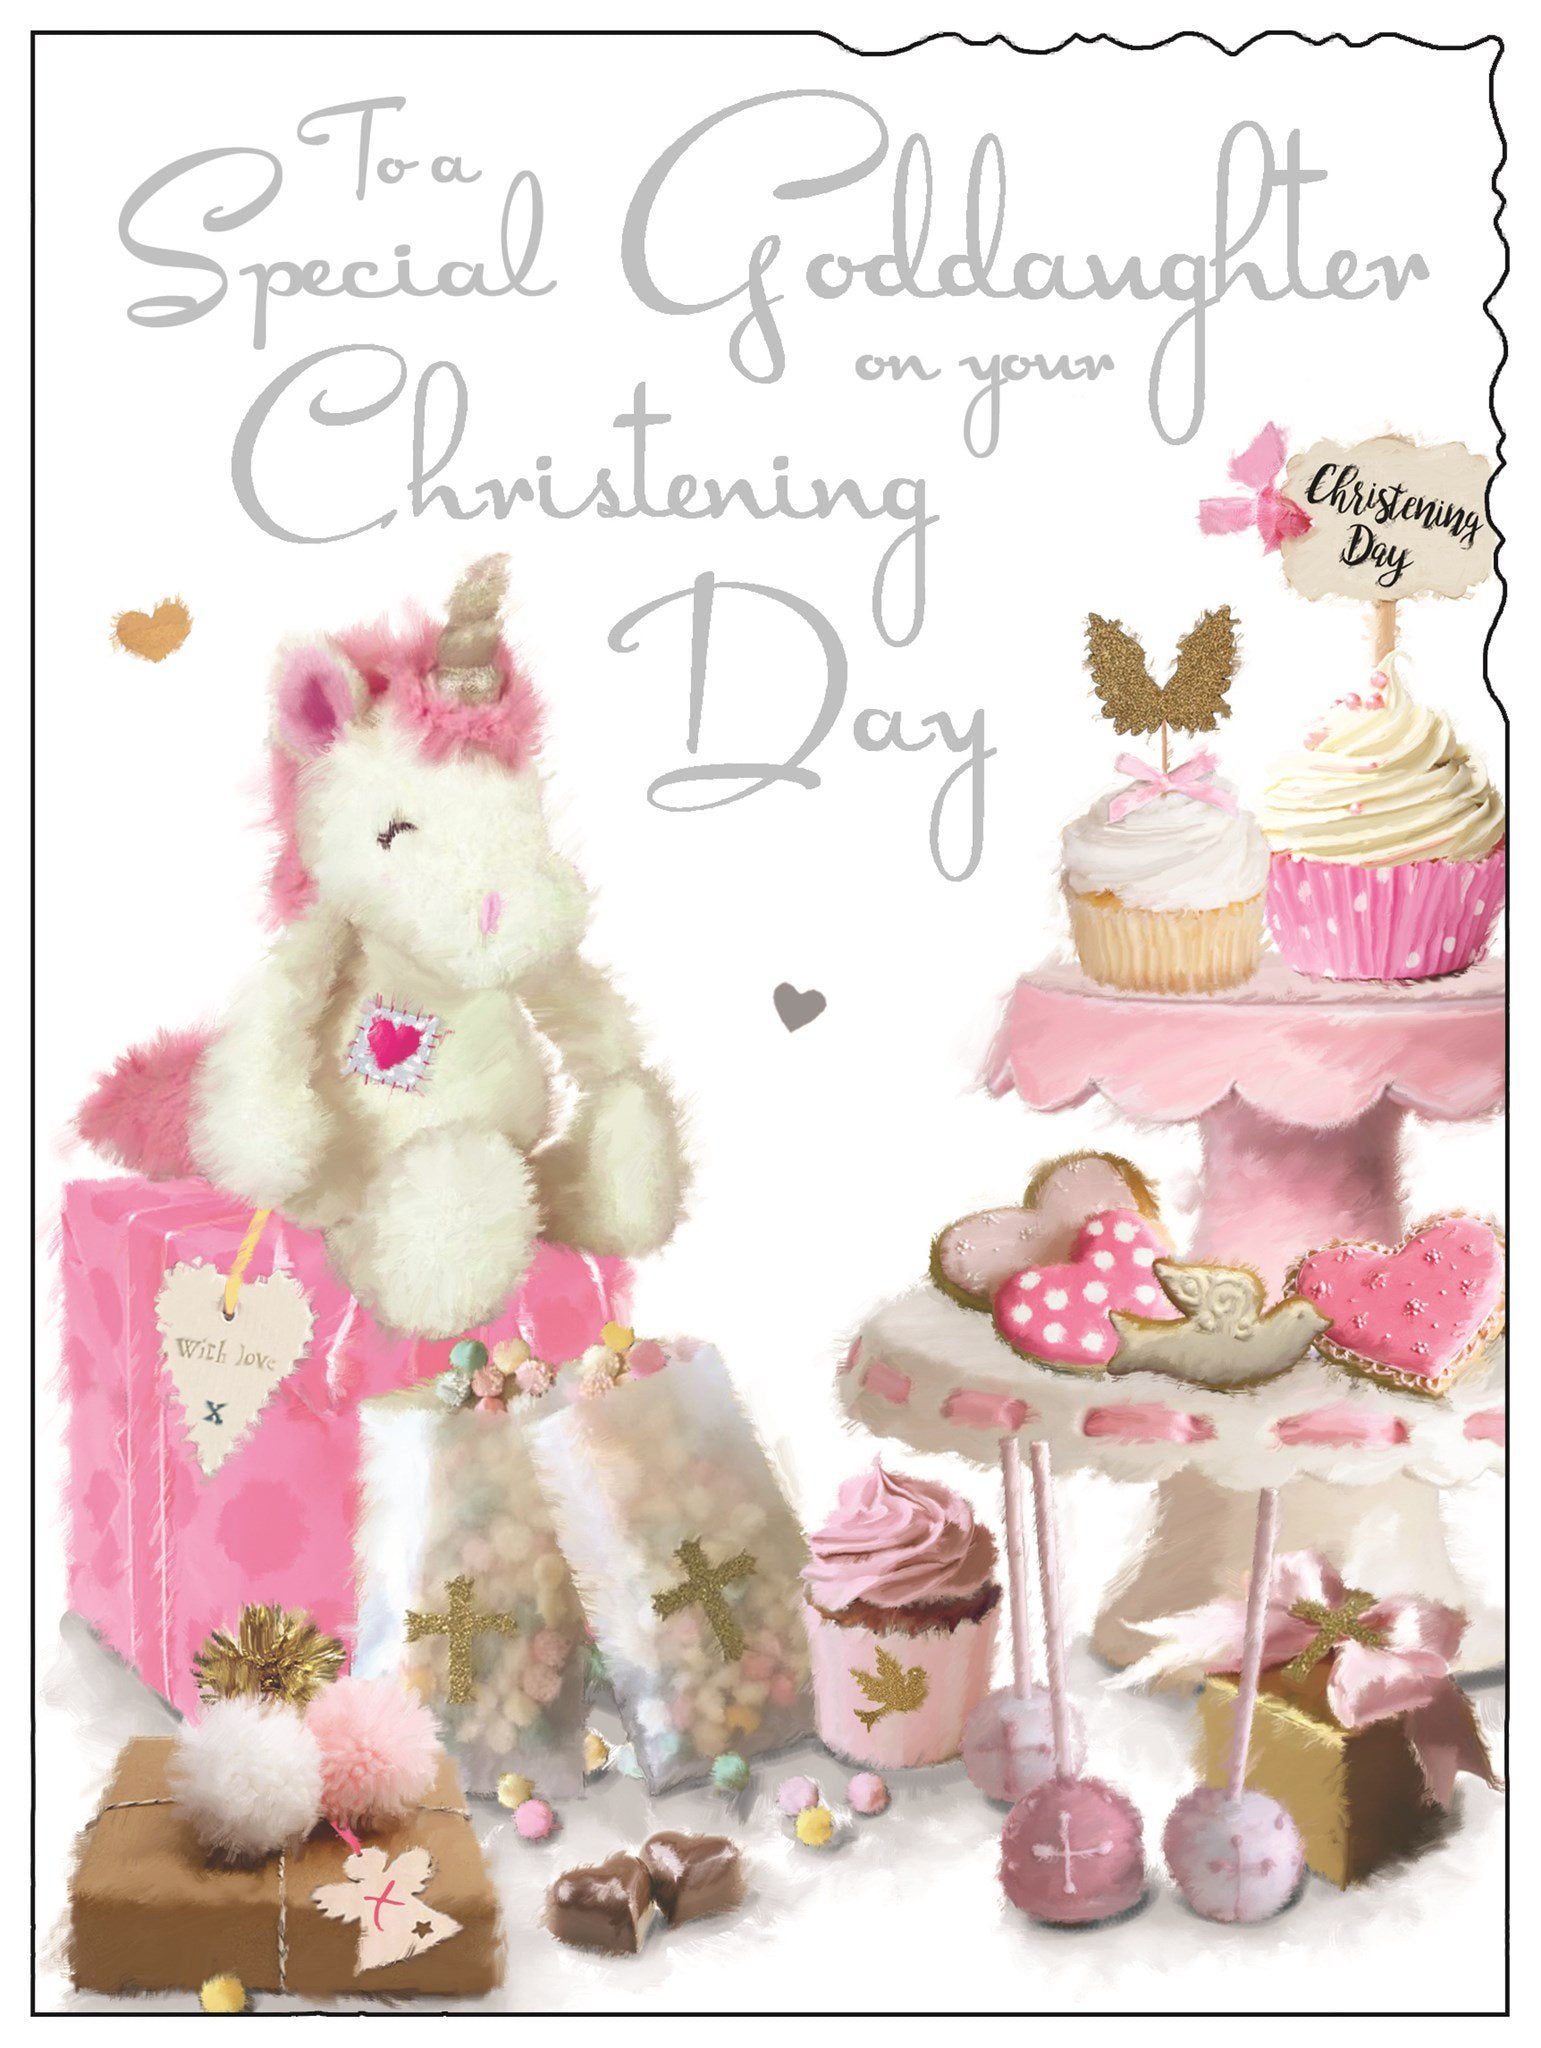 Front of Christening Special Goddaughter Greetings Card